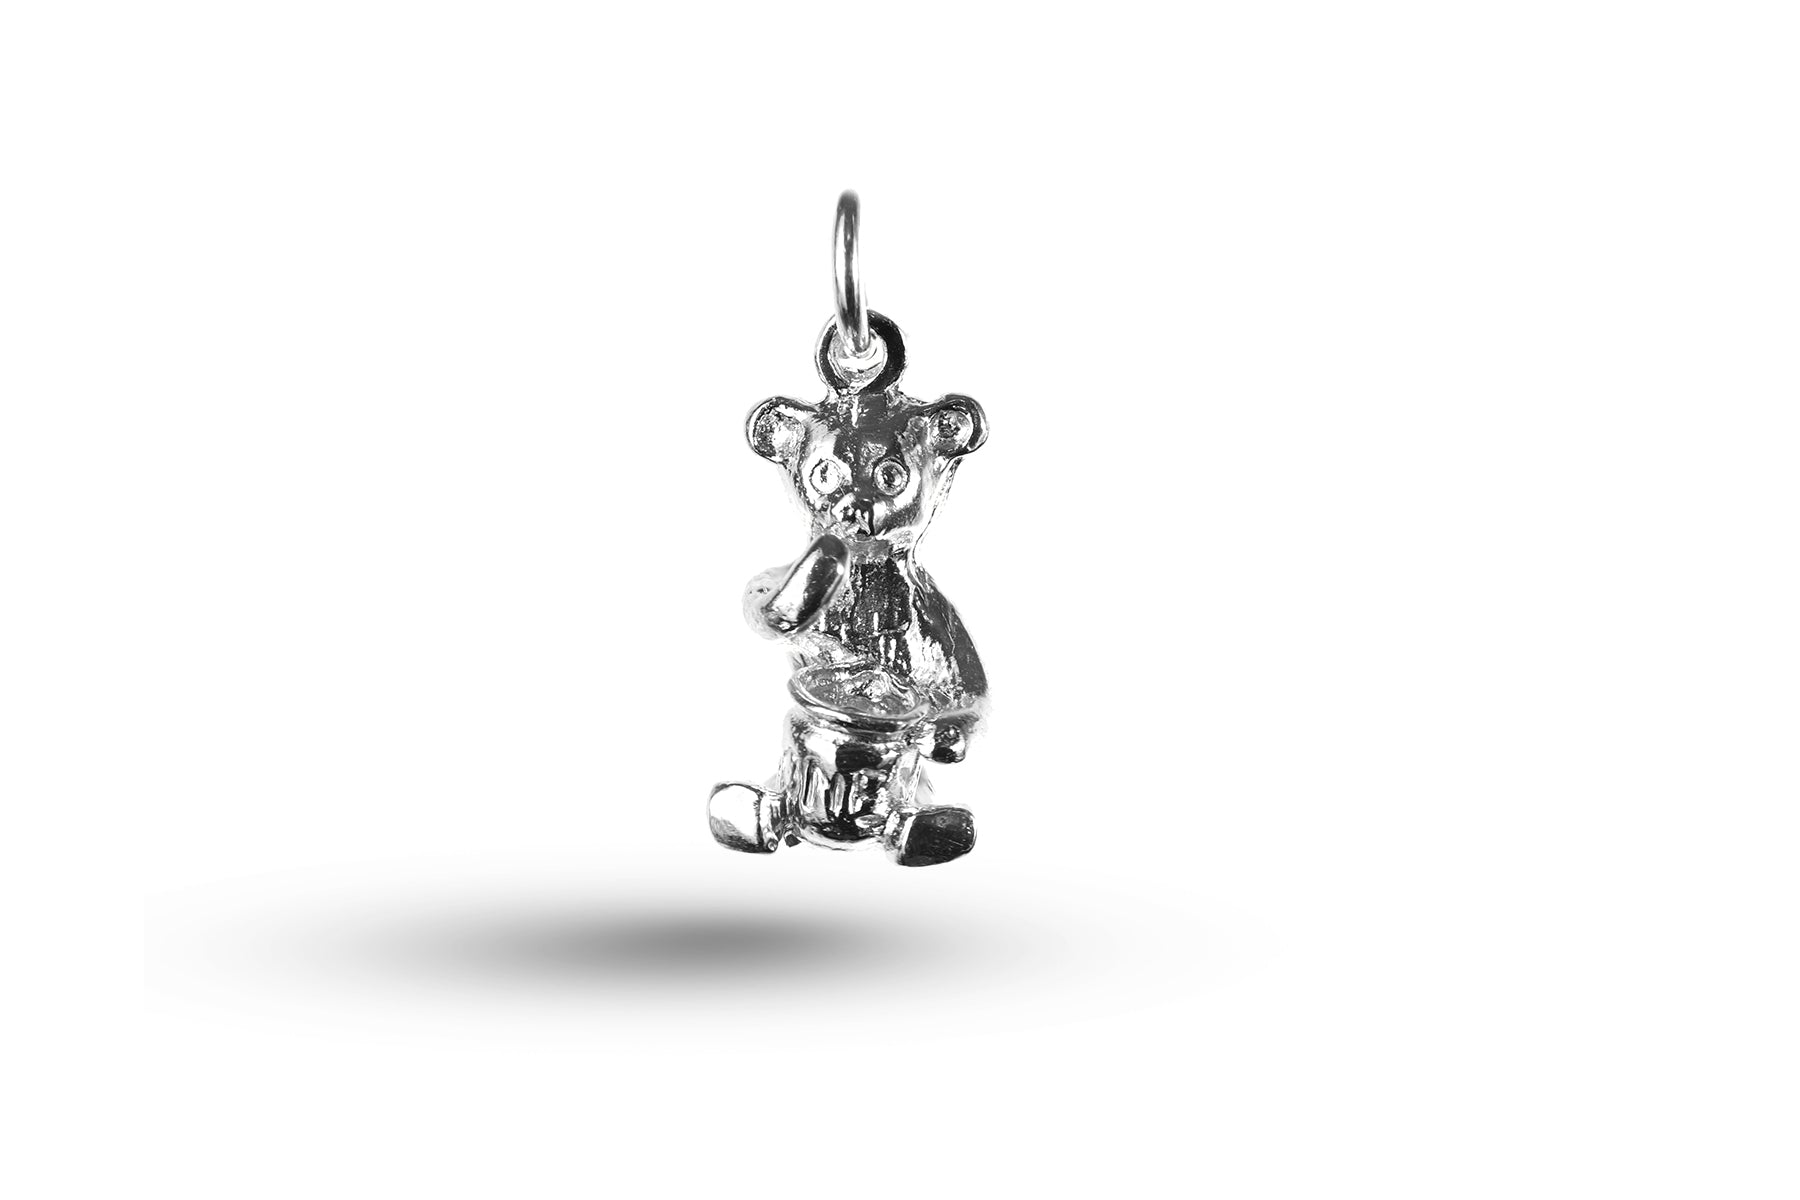 White gold Teddy with Honey Pot charm.